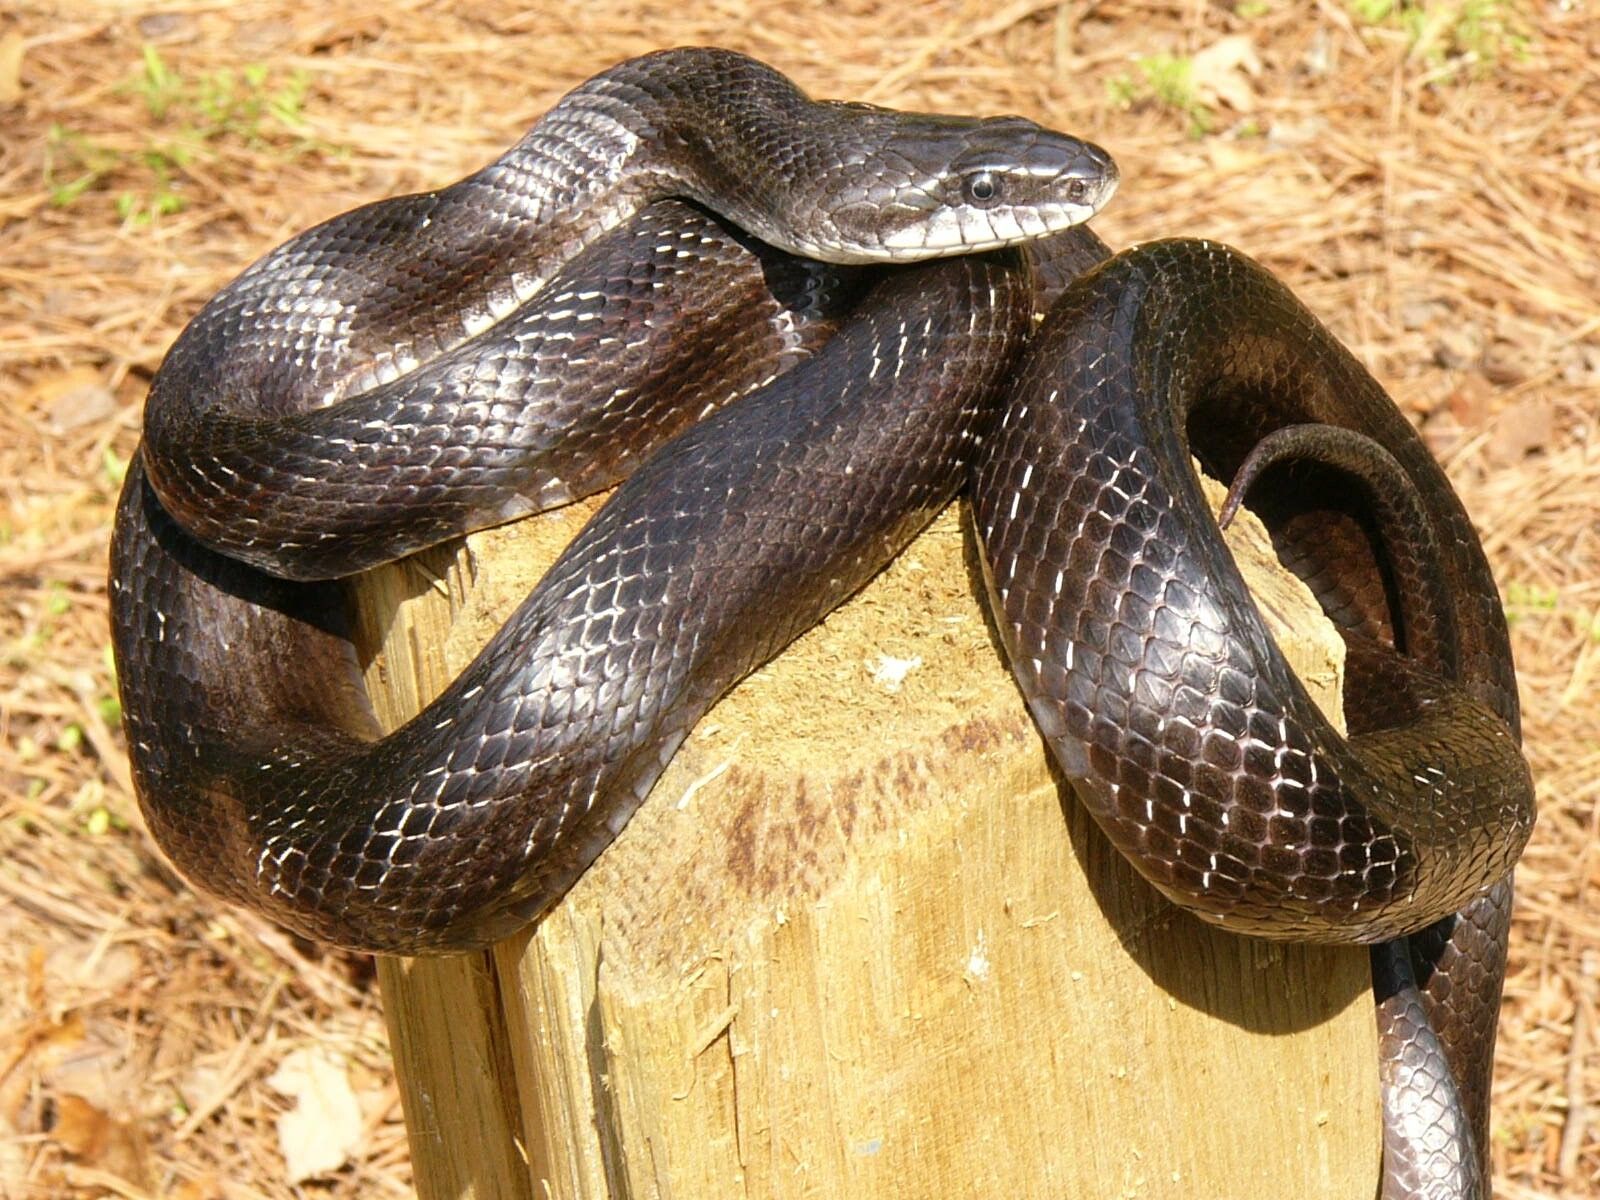 Known for its climbing ability, the harmless black rat snake is notorious for accidentally crawling inside people's homes. (Photo/John Jensen, Georgia DNR)